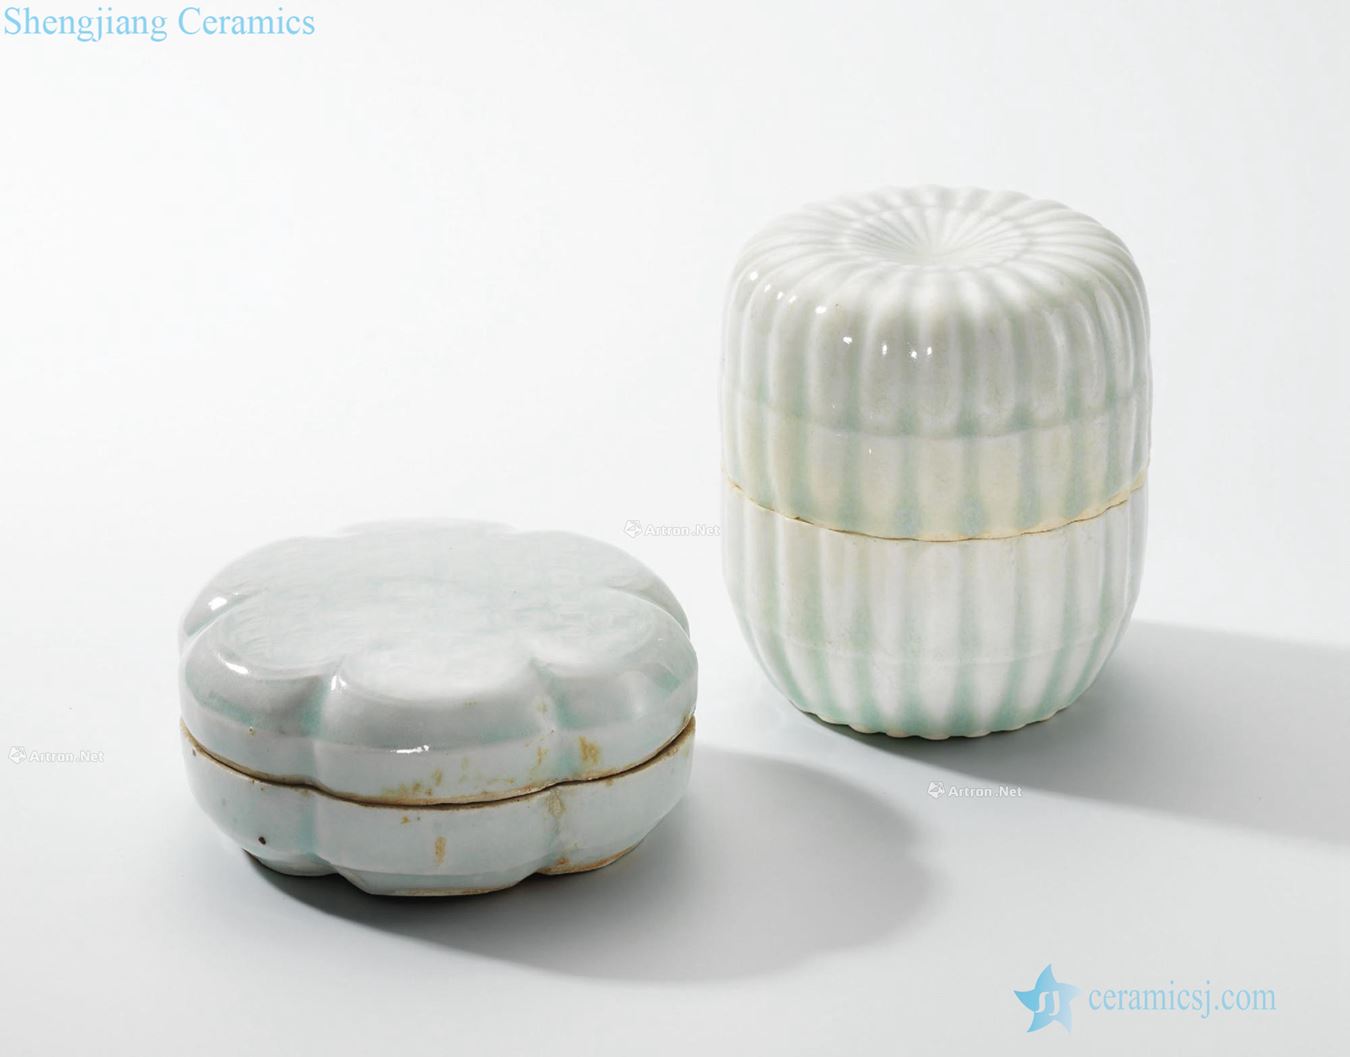 The song dynasty Green chrysanthemum craft disc type cover box, green white glaze six disc type cover box